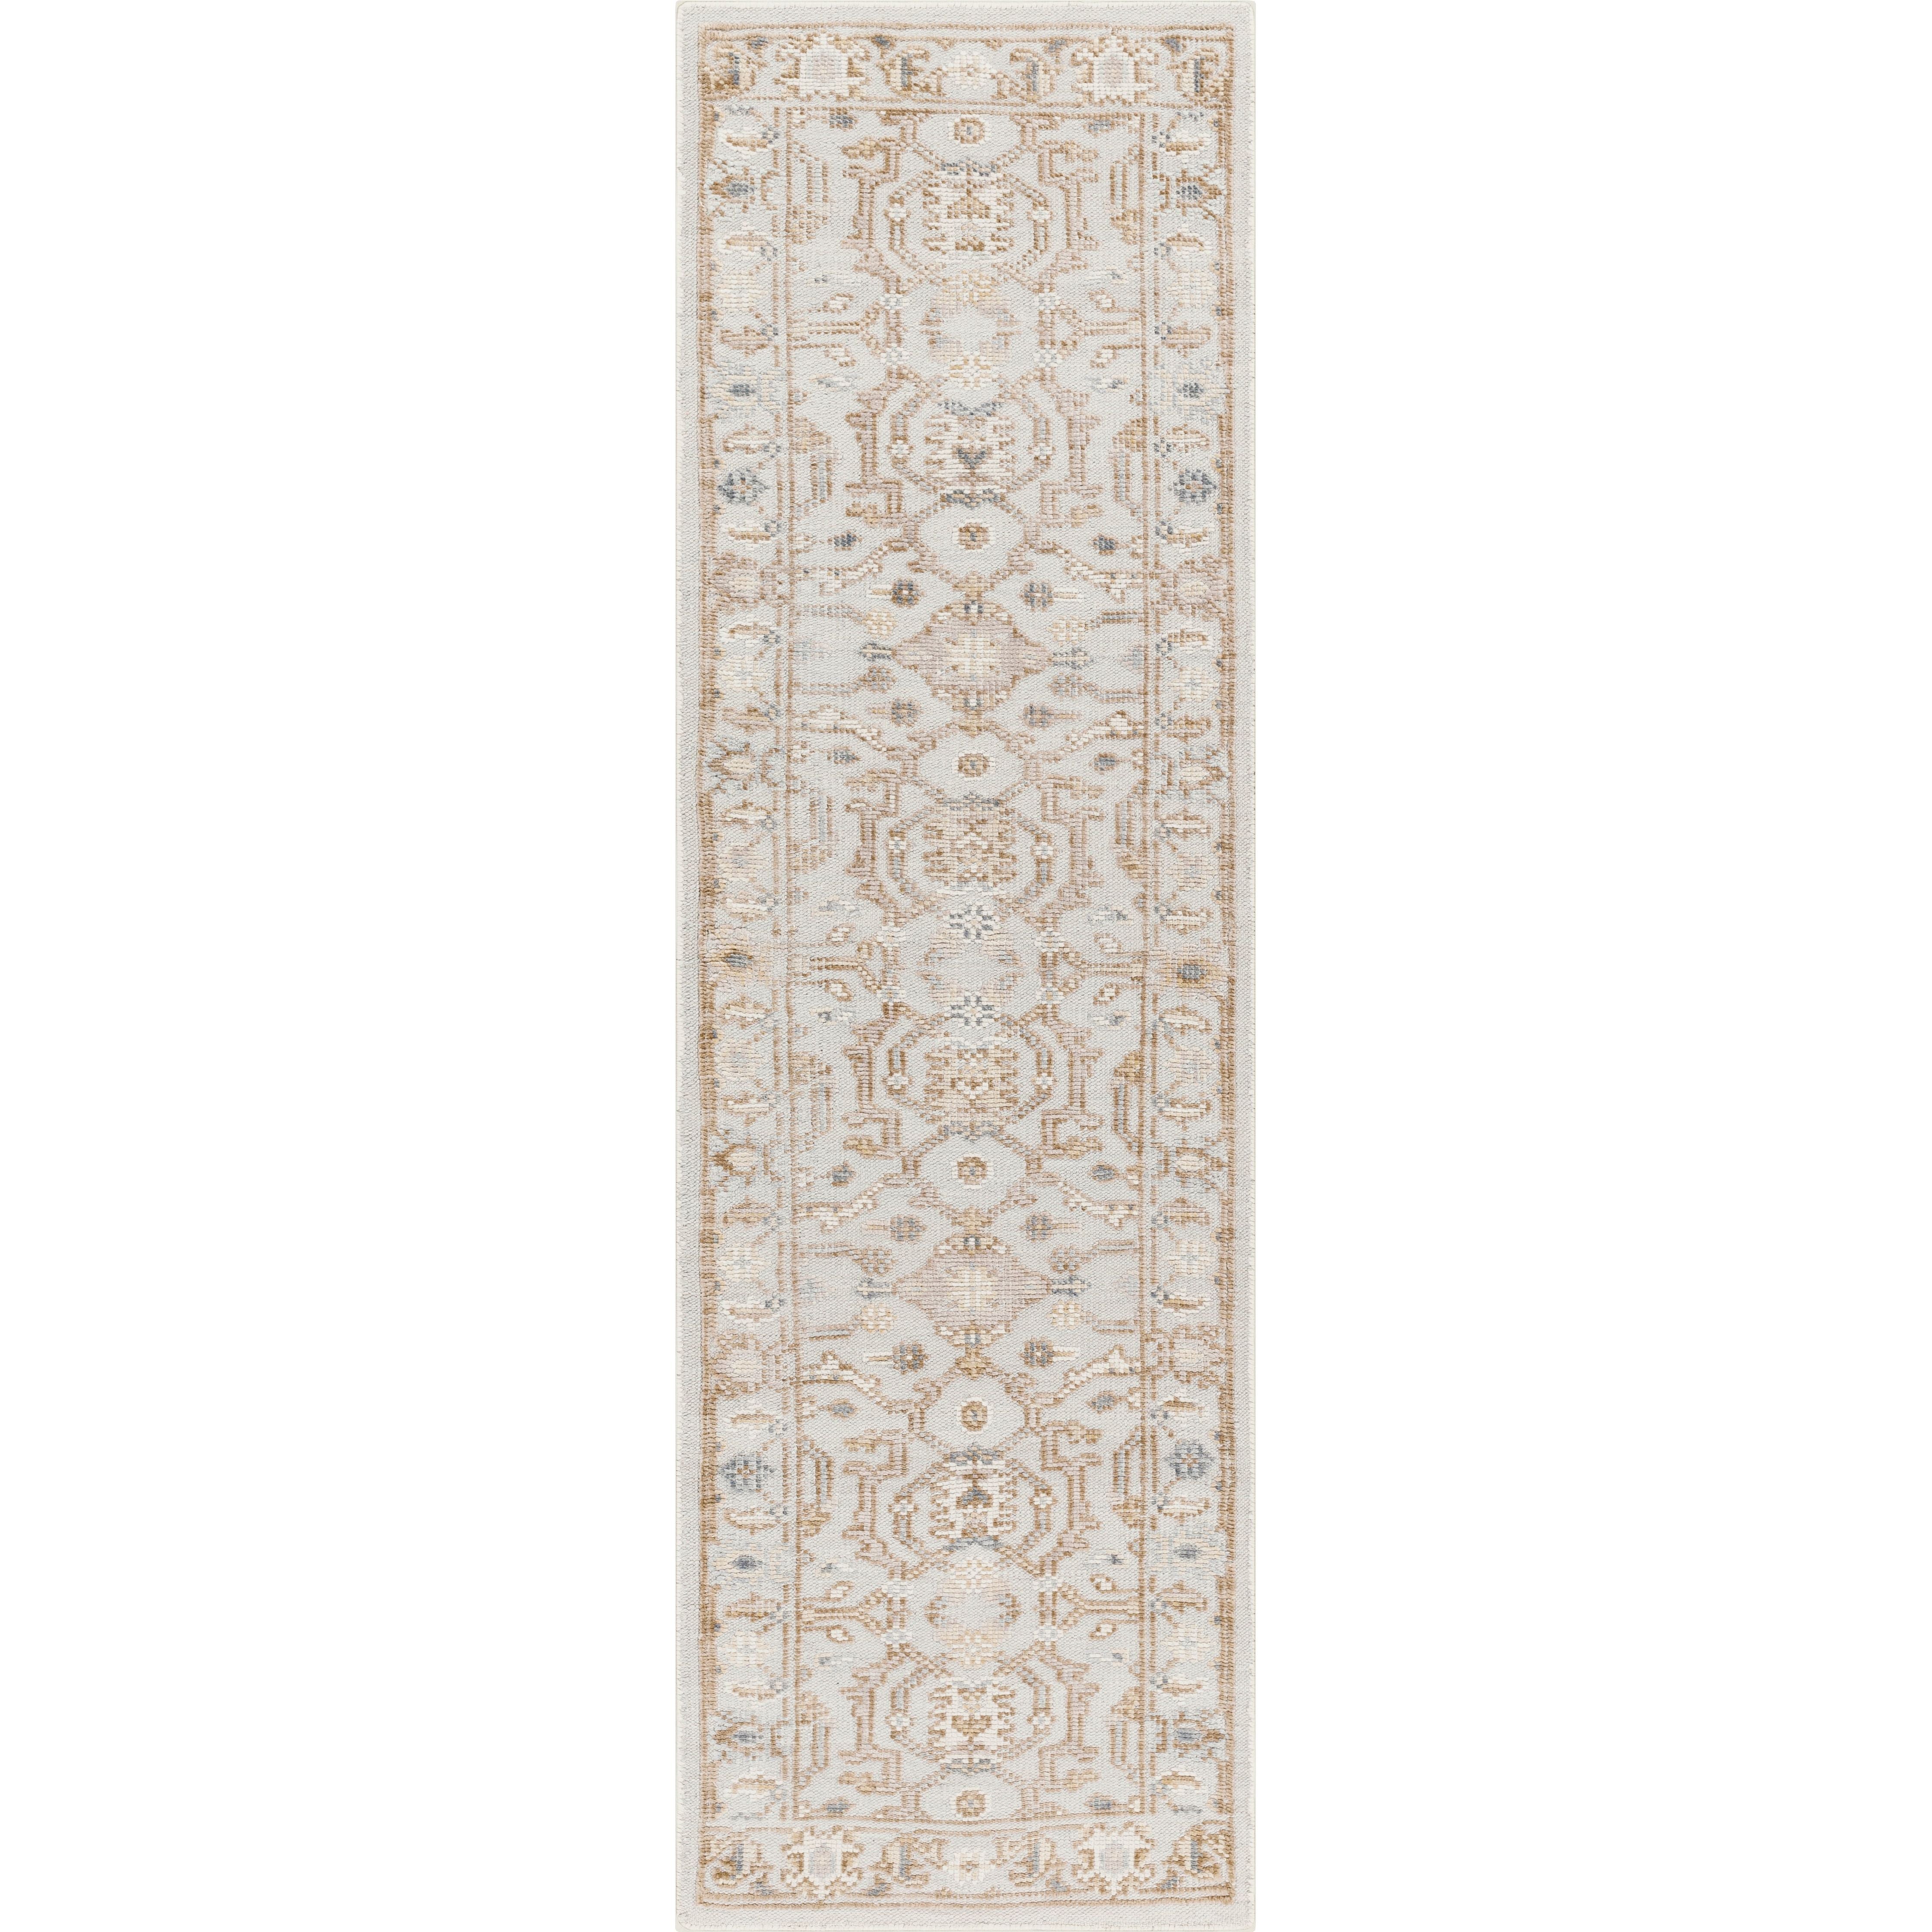 The Revere Light Gray rug showcases a traditional inspired design. The neutral colors and soft materials make it a cozy addition to any space, especially living rooms and dens. Amethyst Home provides interior design, new home construction design consulting, vintage area rugs, and lighting in the Tampa metro area.